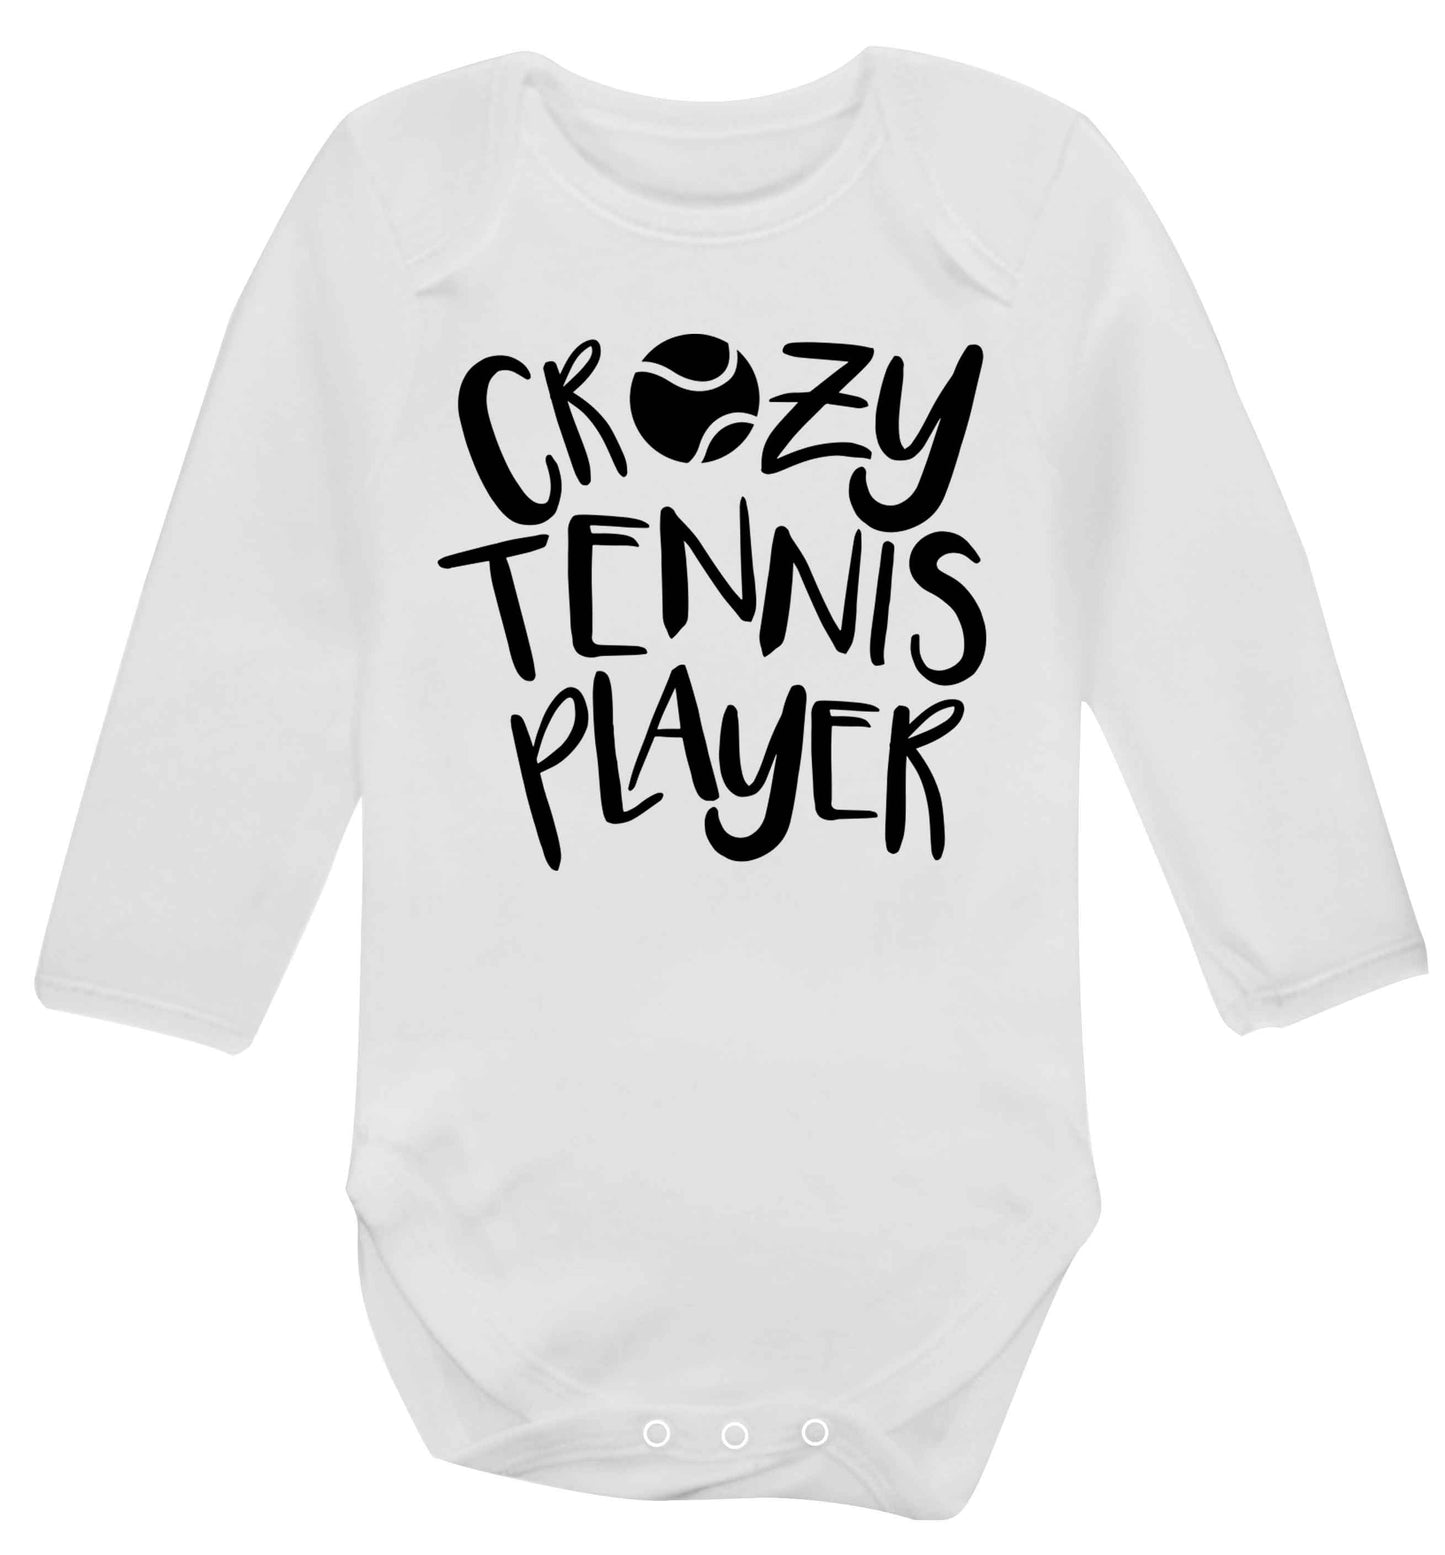 Crazy tennis player Baby Vest long sleeved white 6-12 months